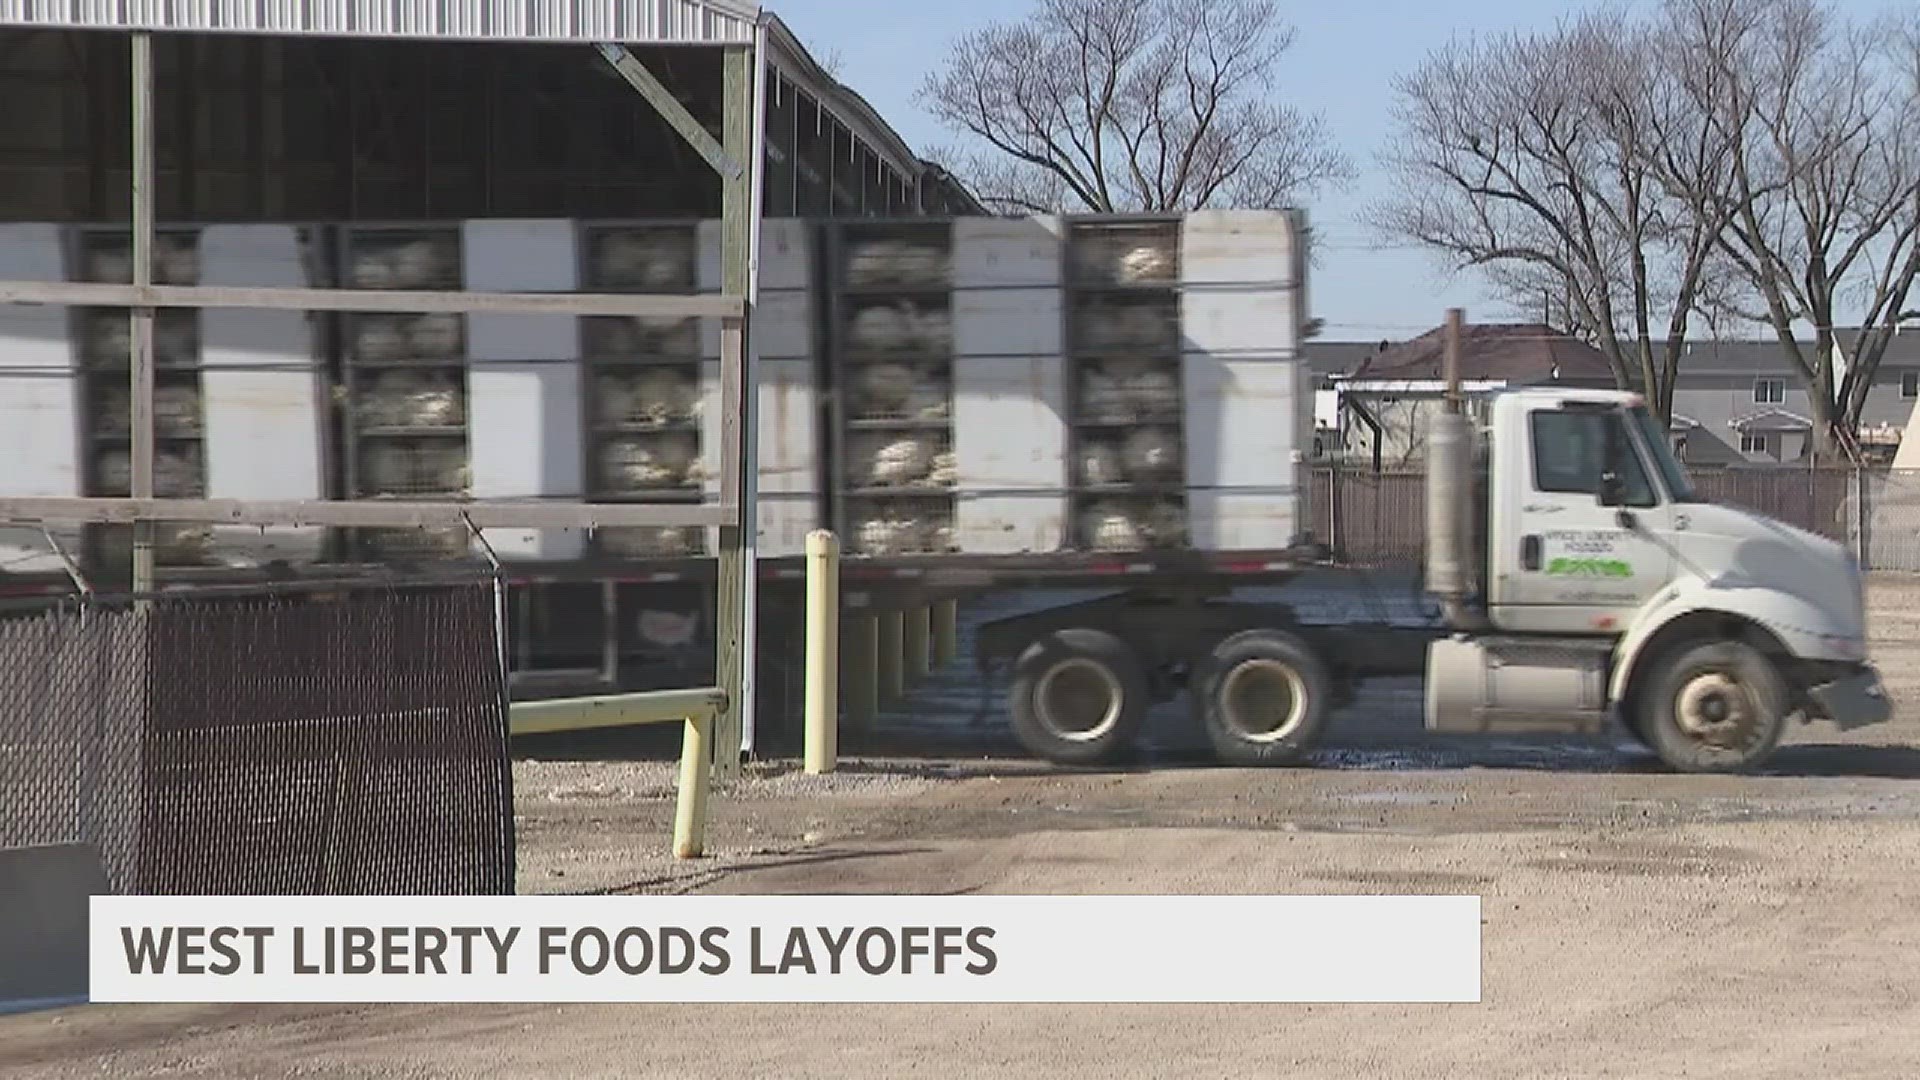 The company says it will continue to be headquartered in North Liberty.